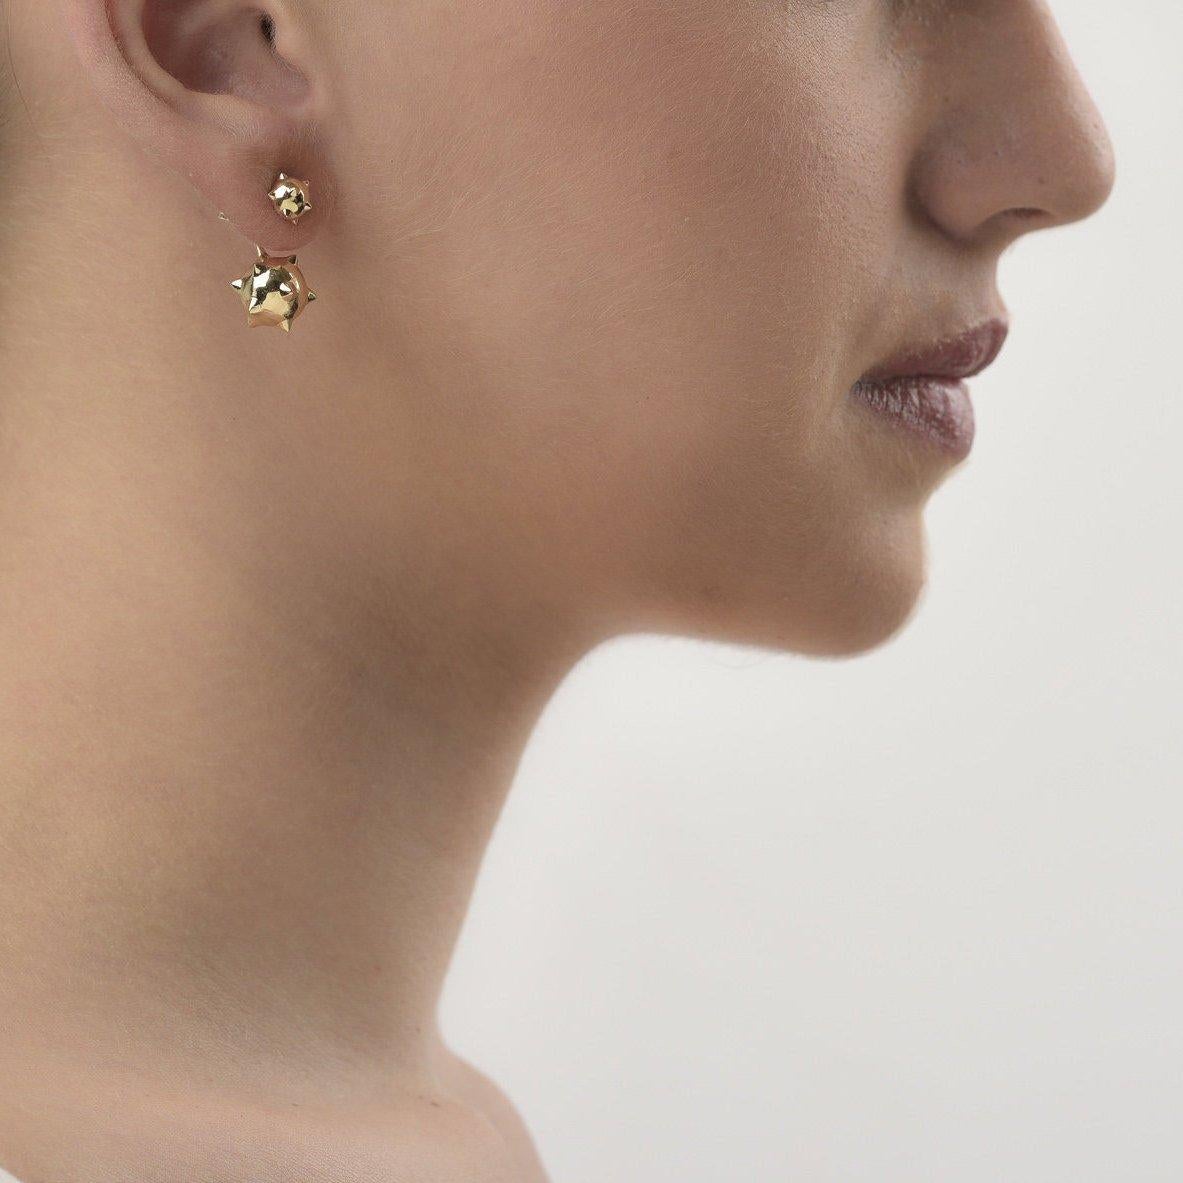 The ‘Morning Star’ ear jackets are crafted in 18K gold, hallmarked in Cyprus. These impressive, three piece ear jackets come in a highly polished finish and make the perfect choice for every occasion. The small spiked domes can be worn separately as